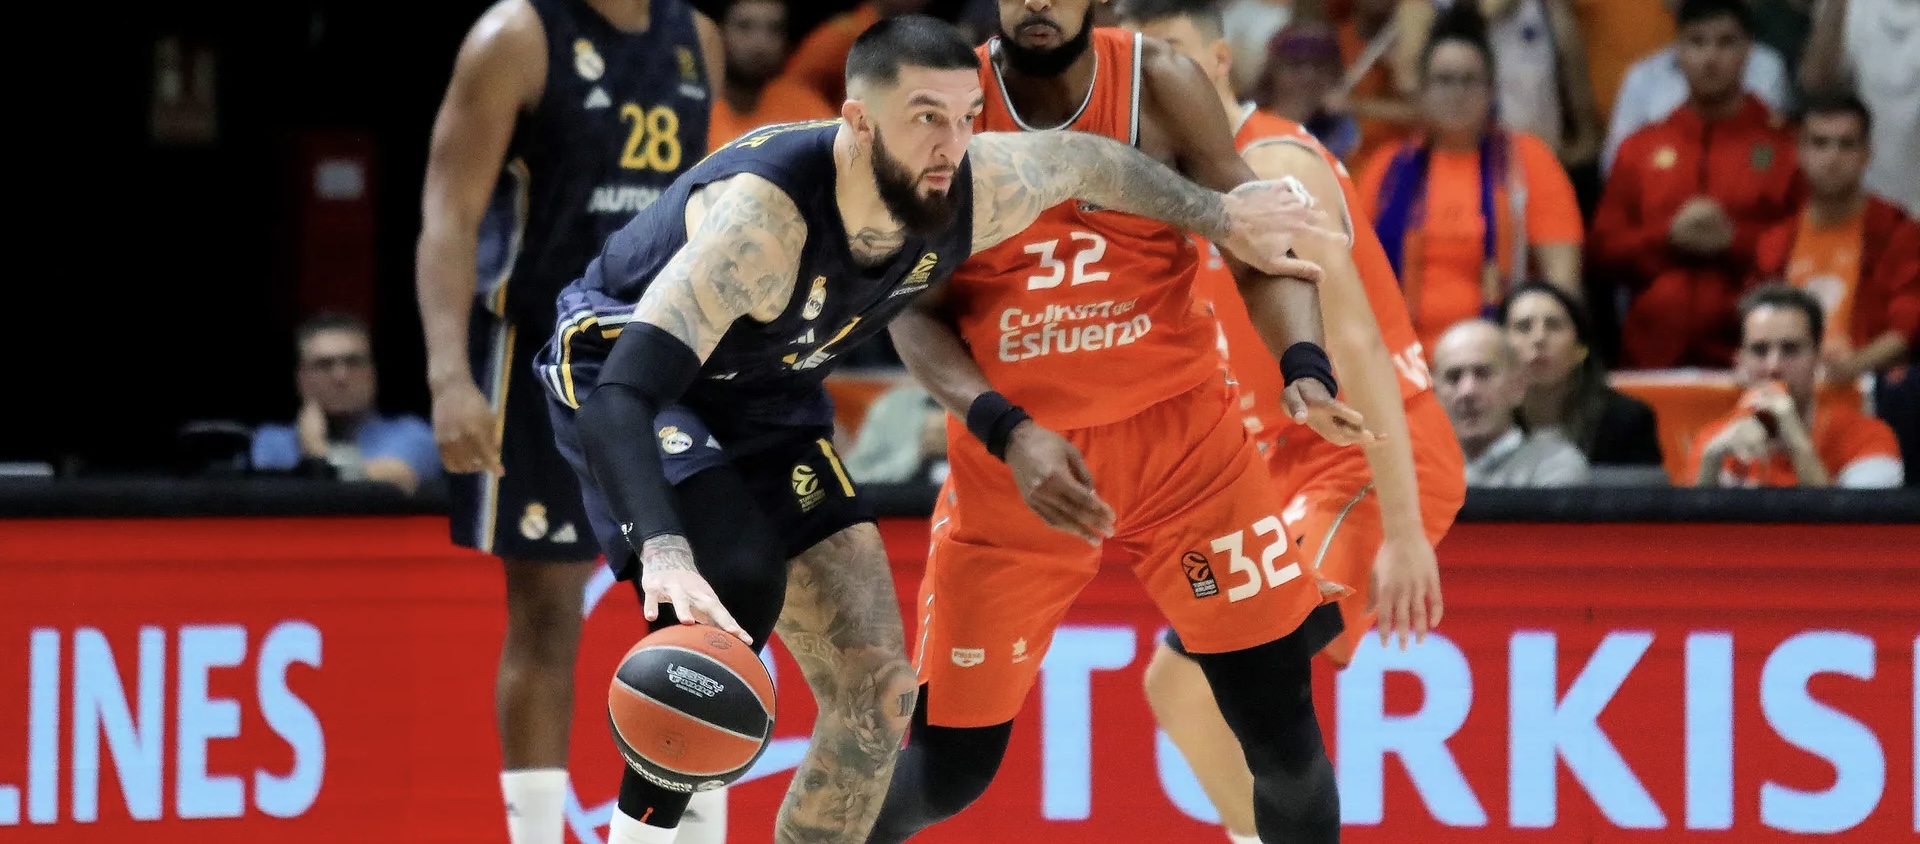 “The key against Nebo + Rivero in the paint, focus on team defense” – Vincent Poirier Interview